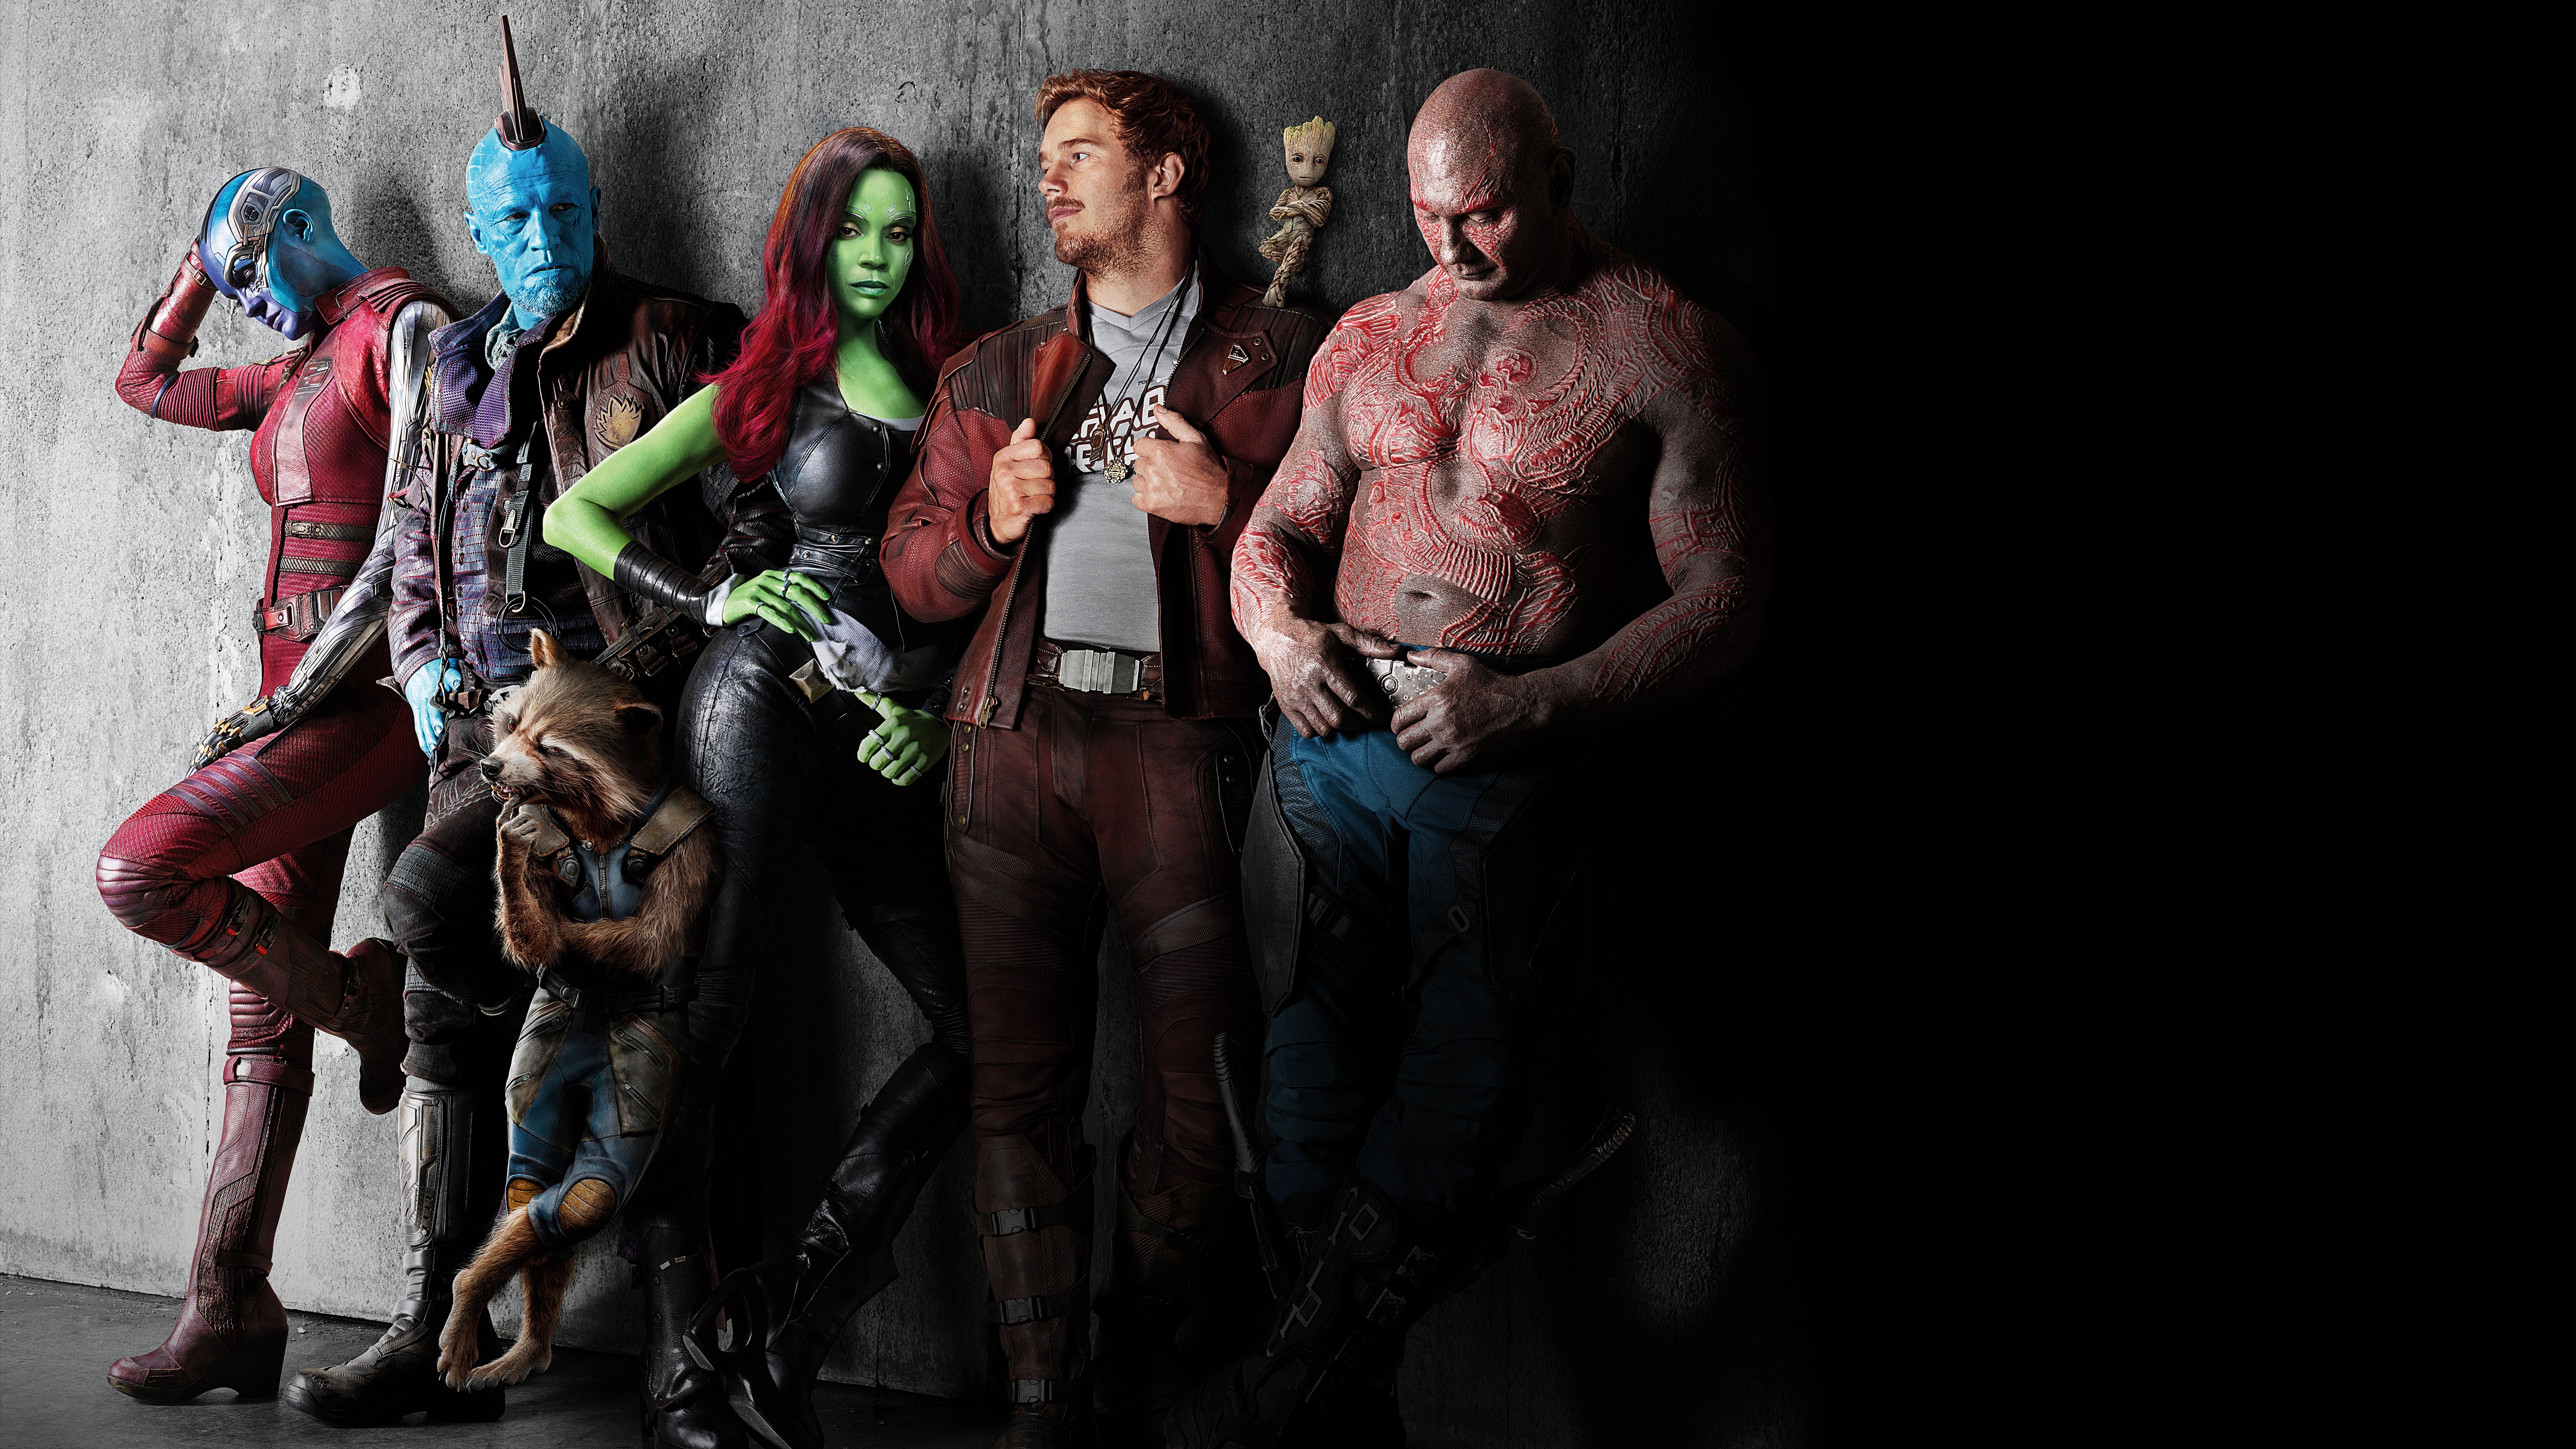 Gamora, Star Lord, Peter Quill, Drax the Destroyer, Rocket